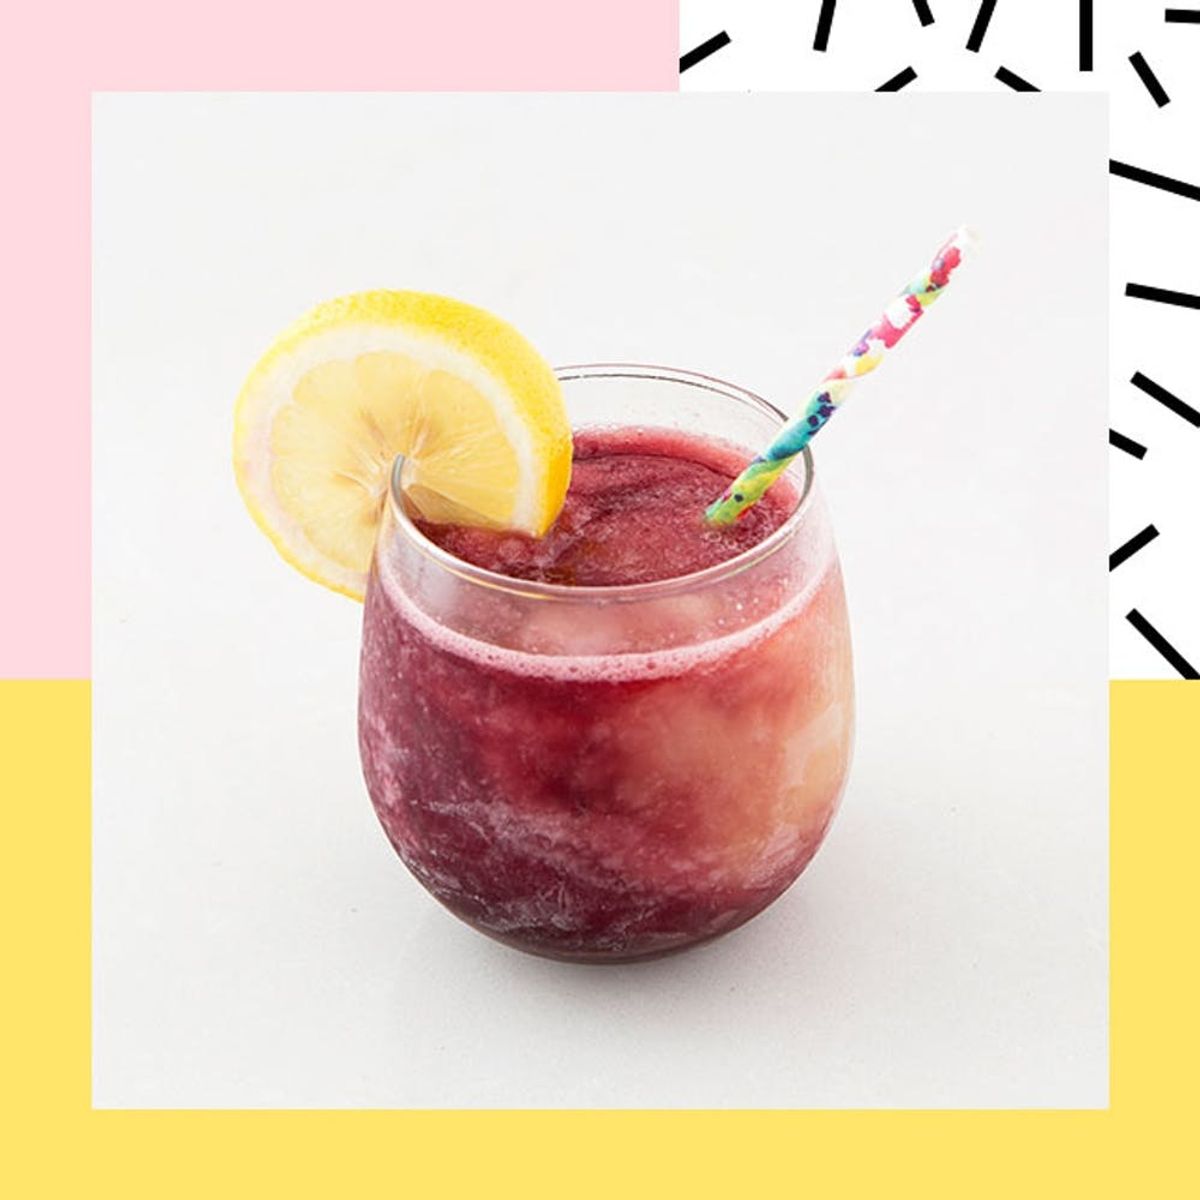 Your Summer Pool Party Isn’t Complete Without These 2-Ingredient Wine Slushies